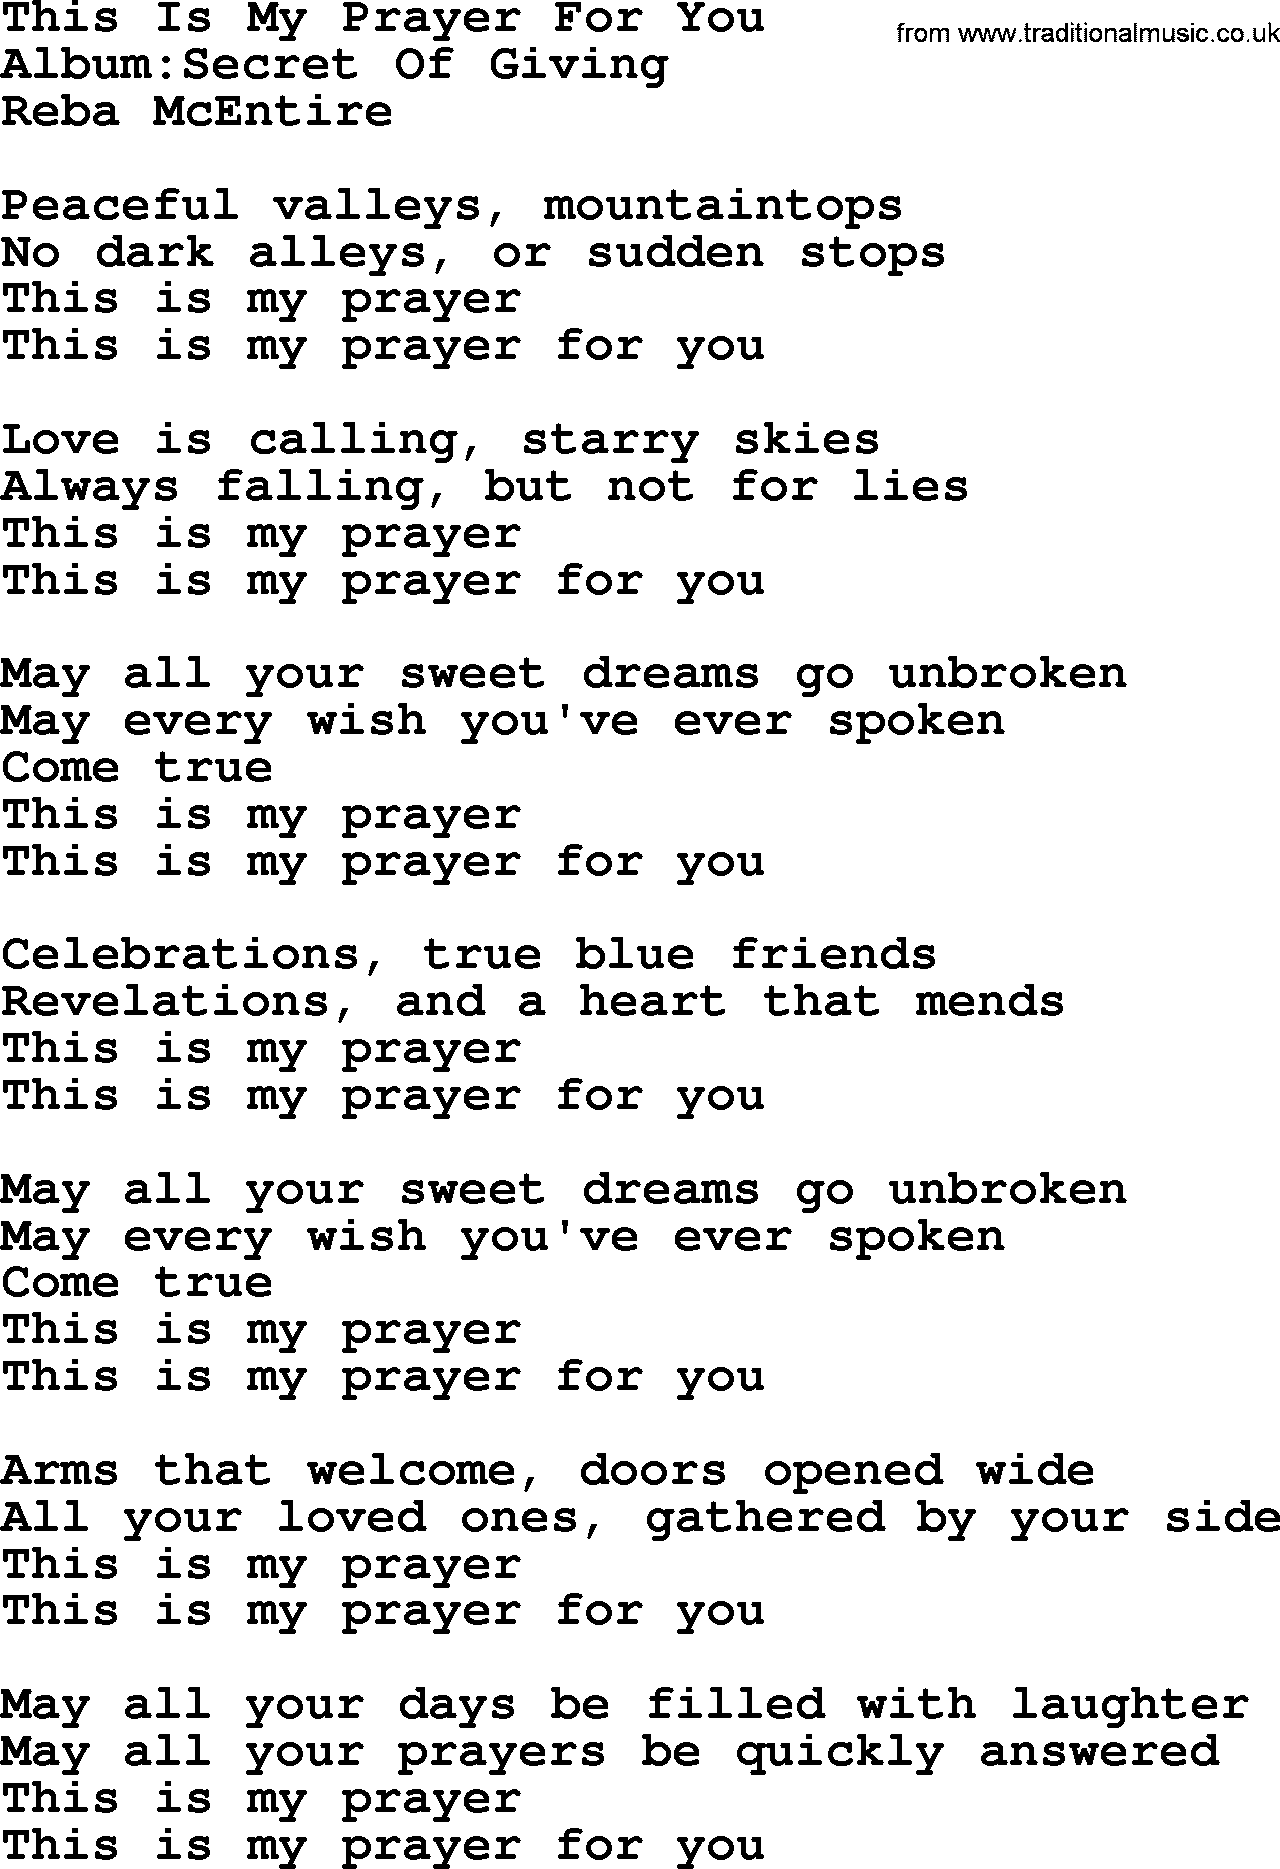 Reba McEntire song: This Is My Prayer For You lyrics